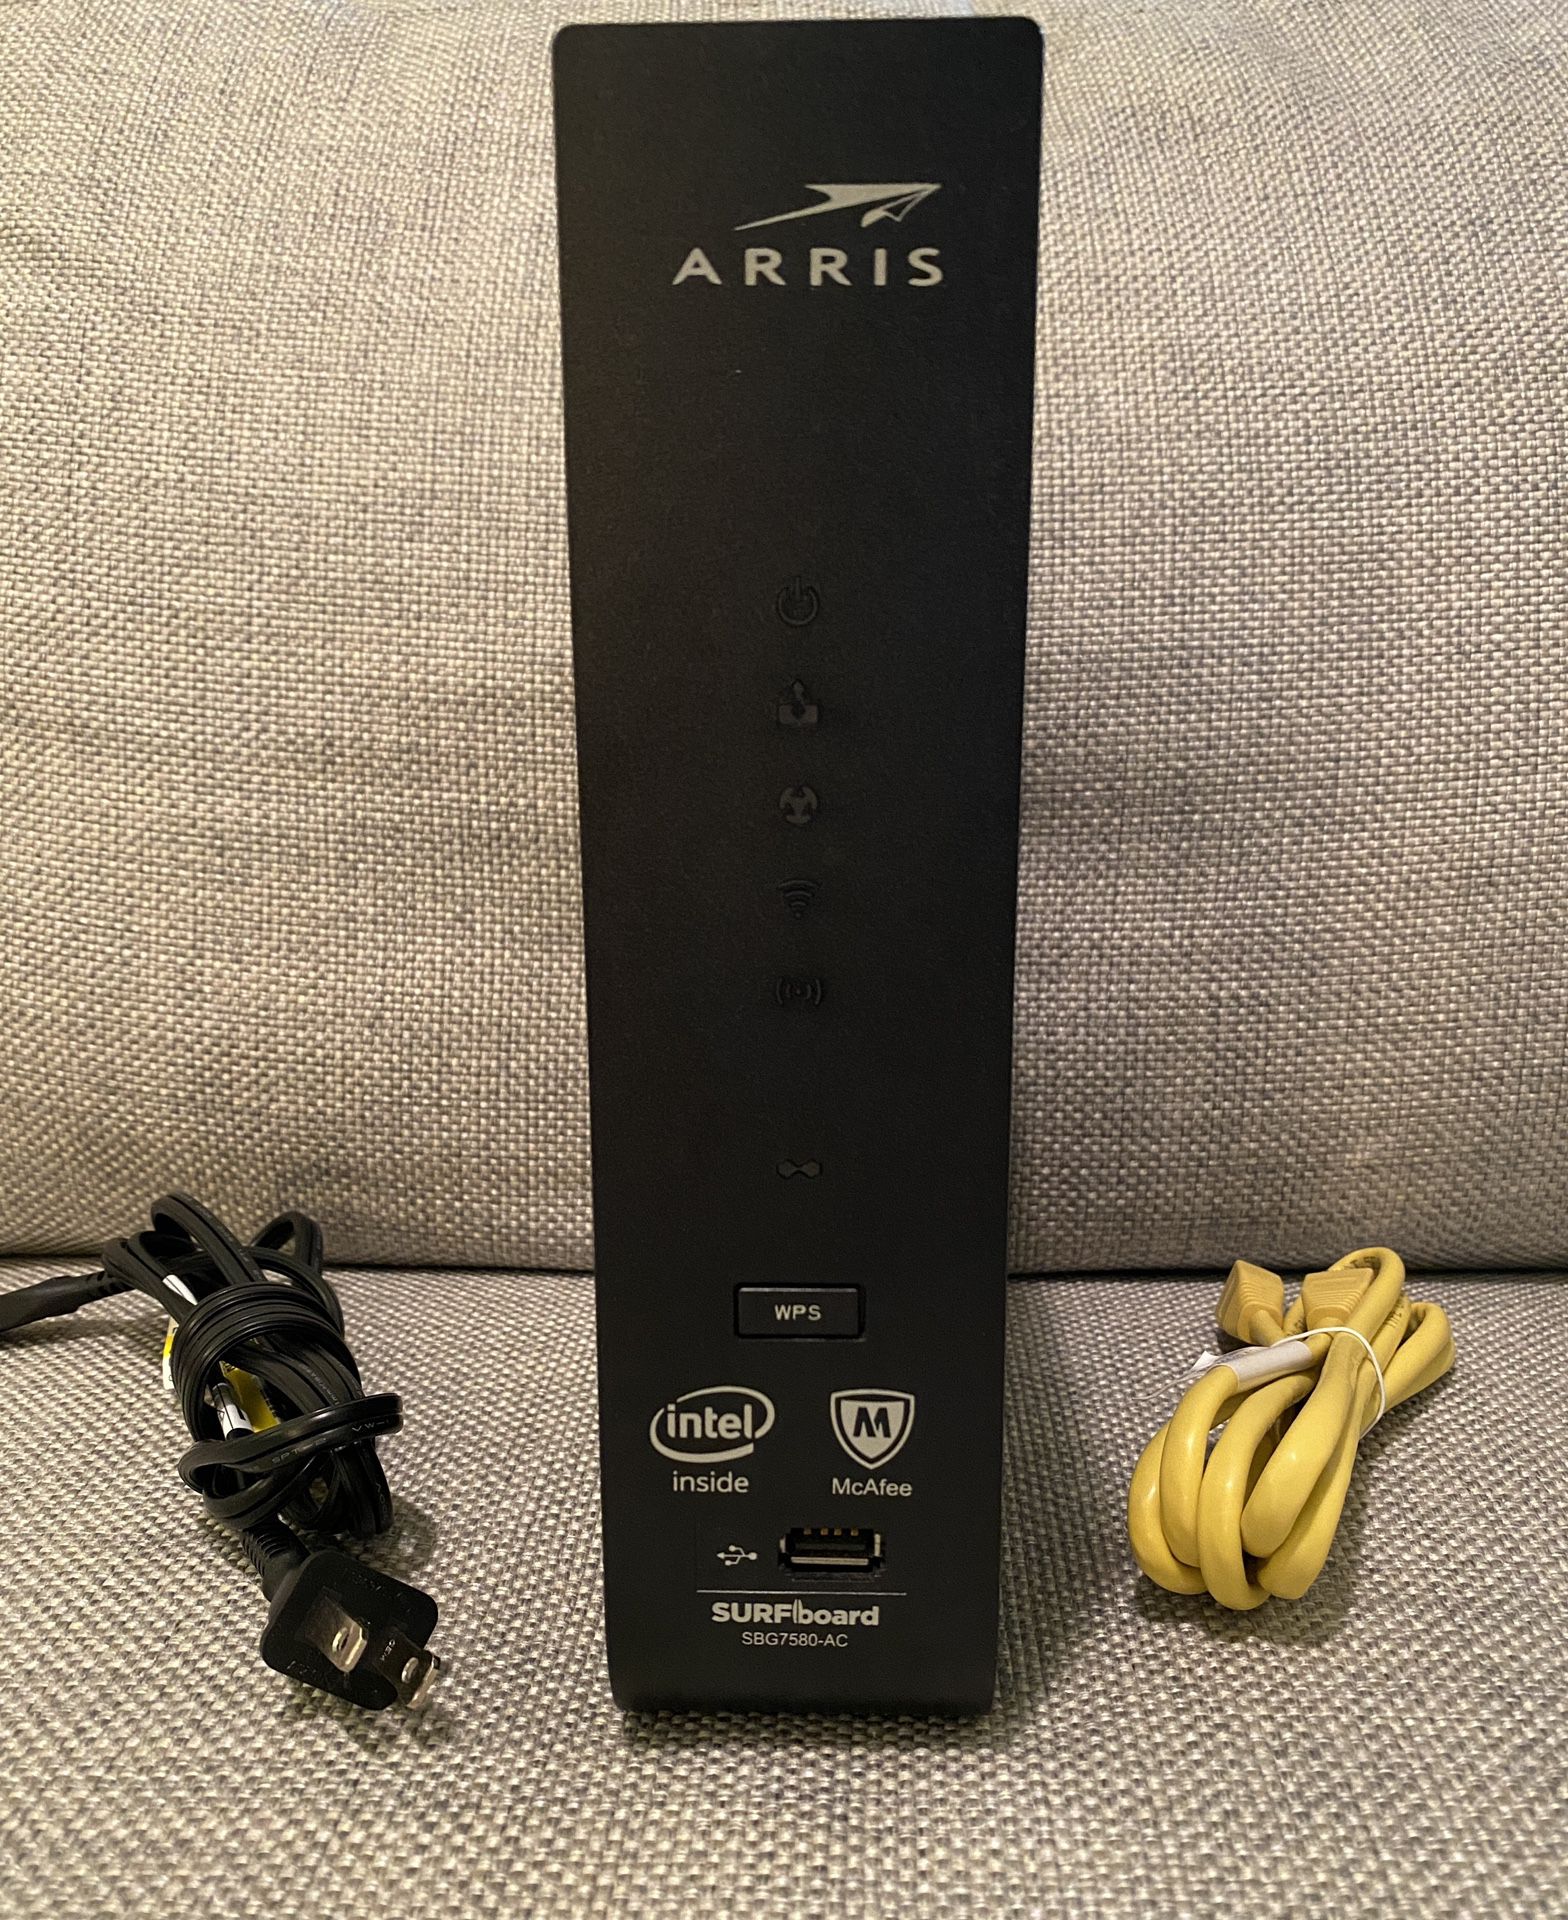 Arris Surfboard Cable Router